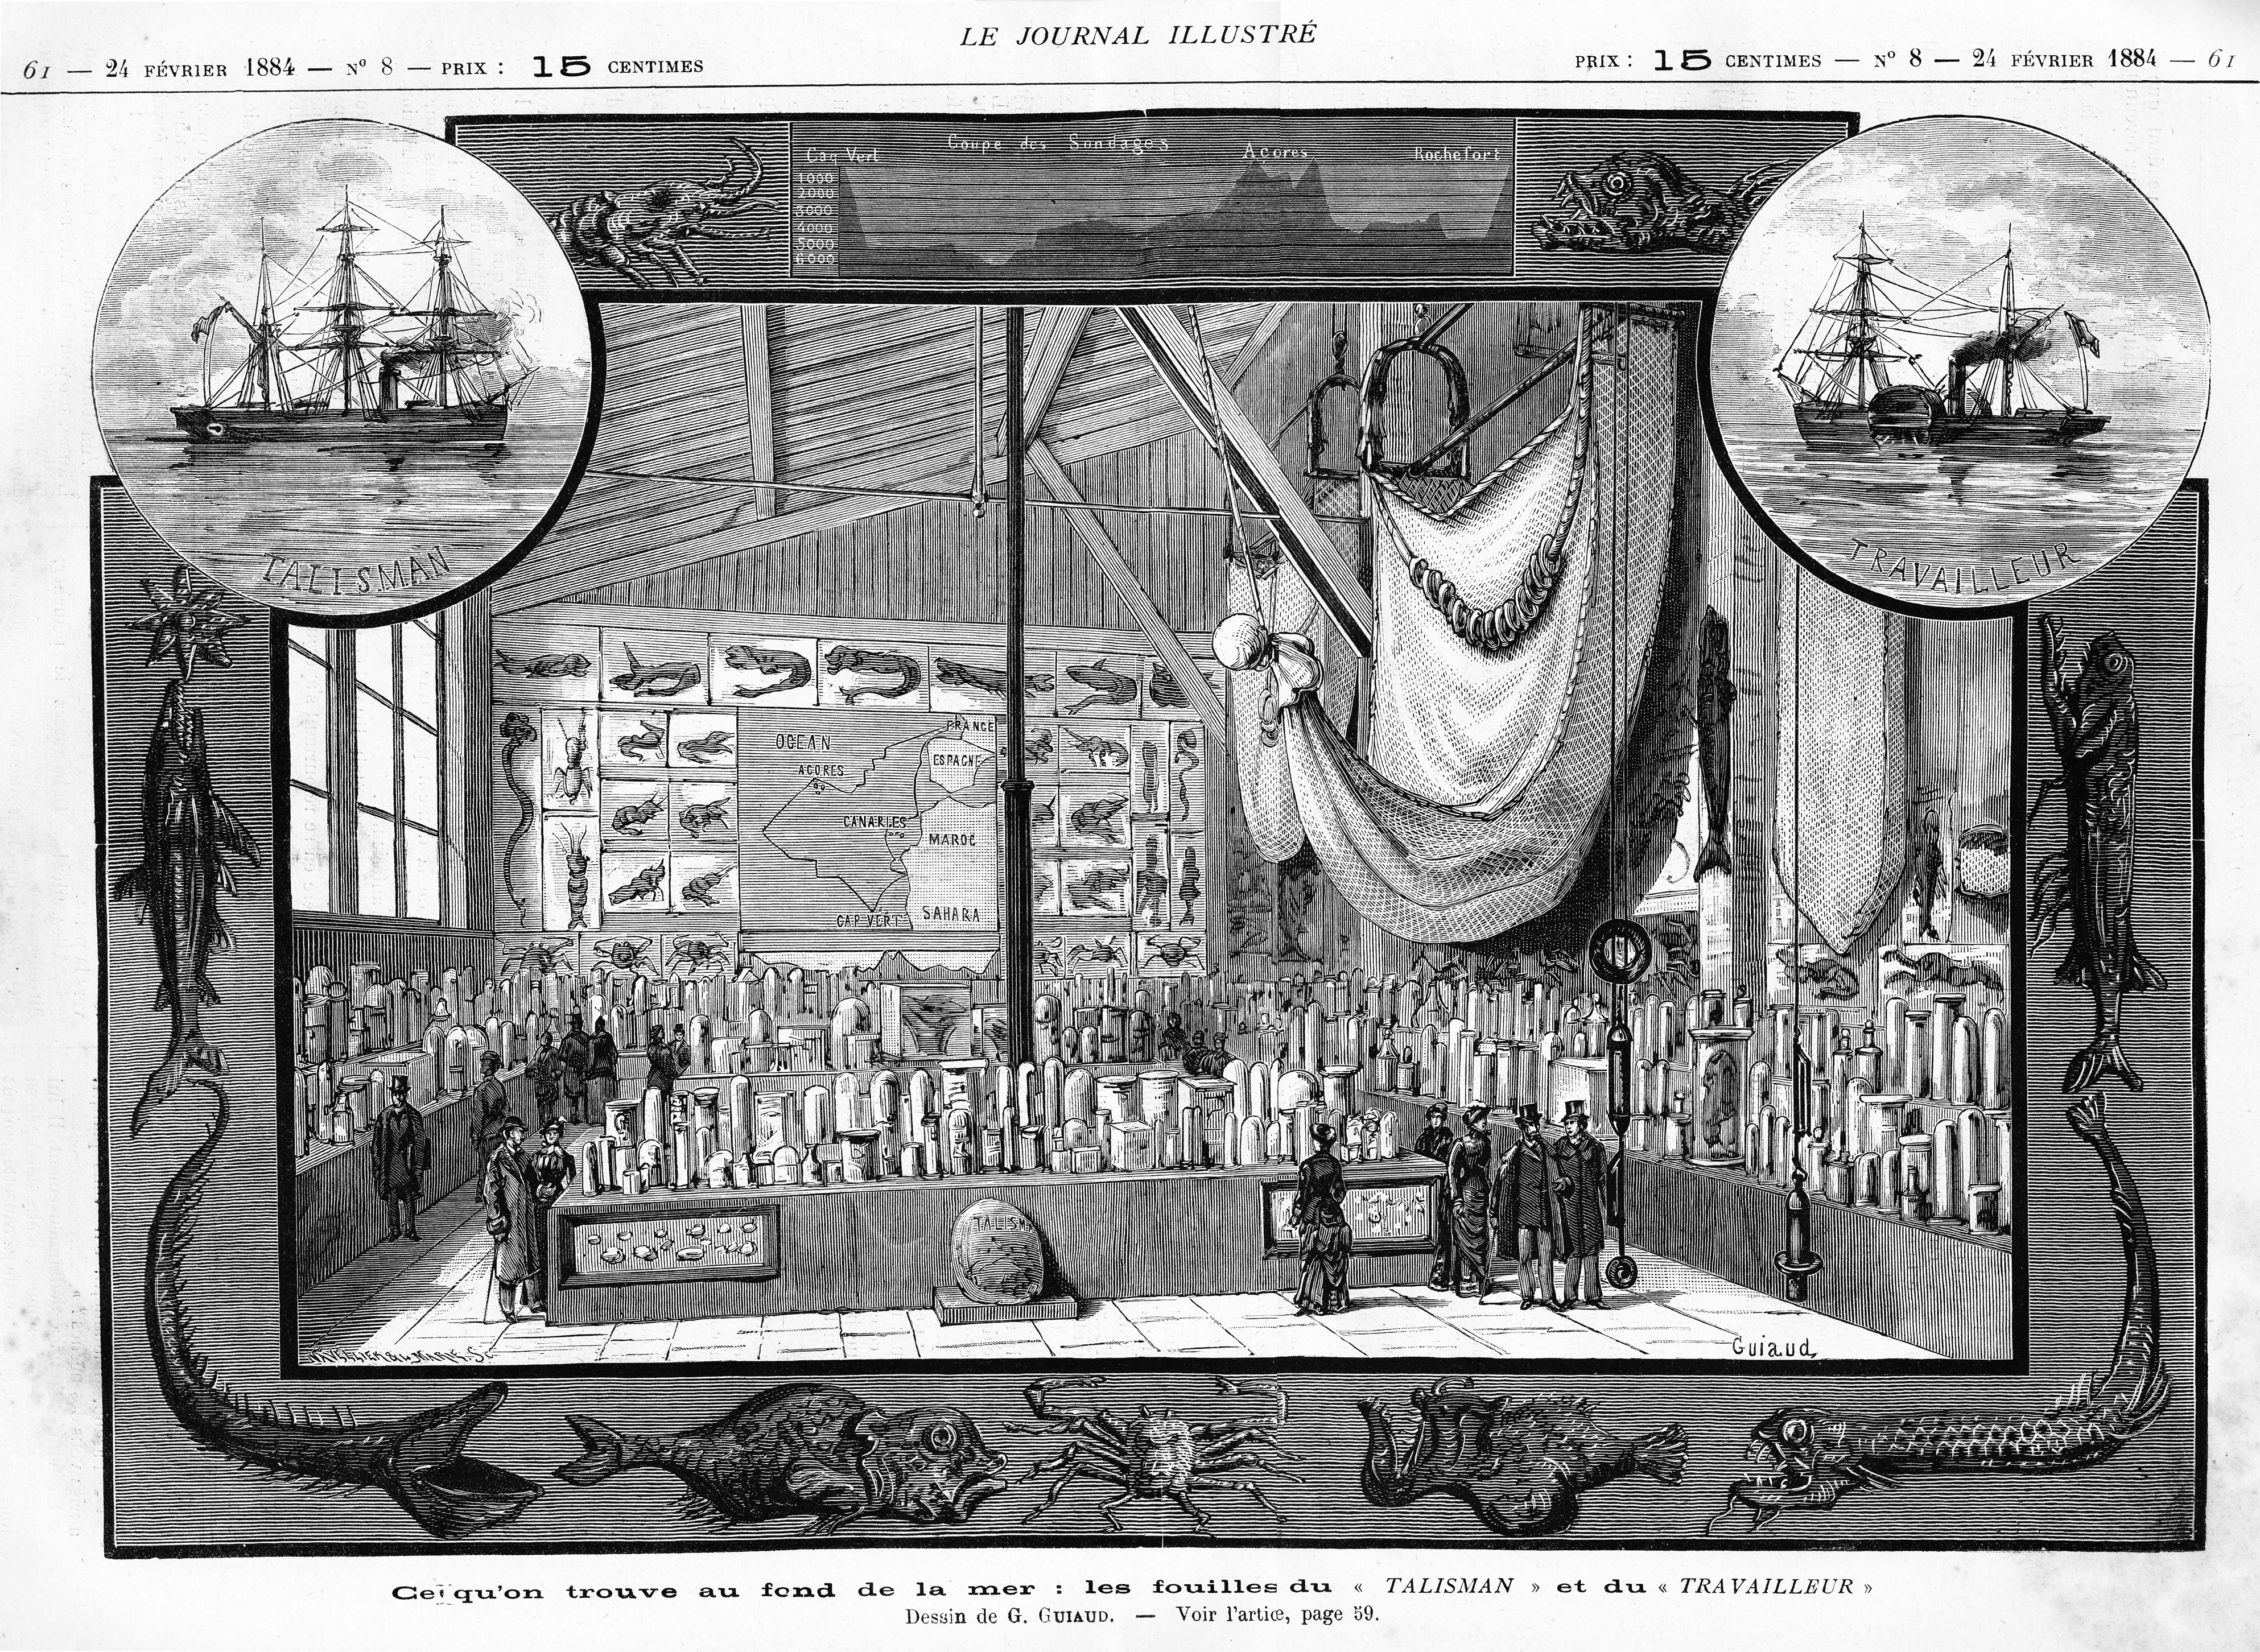 The 1884 Exposition of the Travailleur and the Talisman